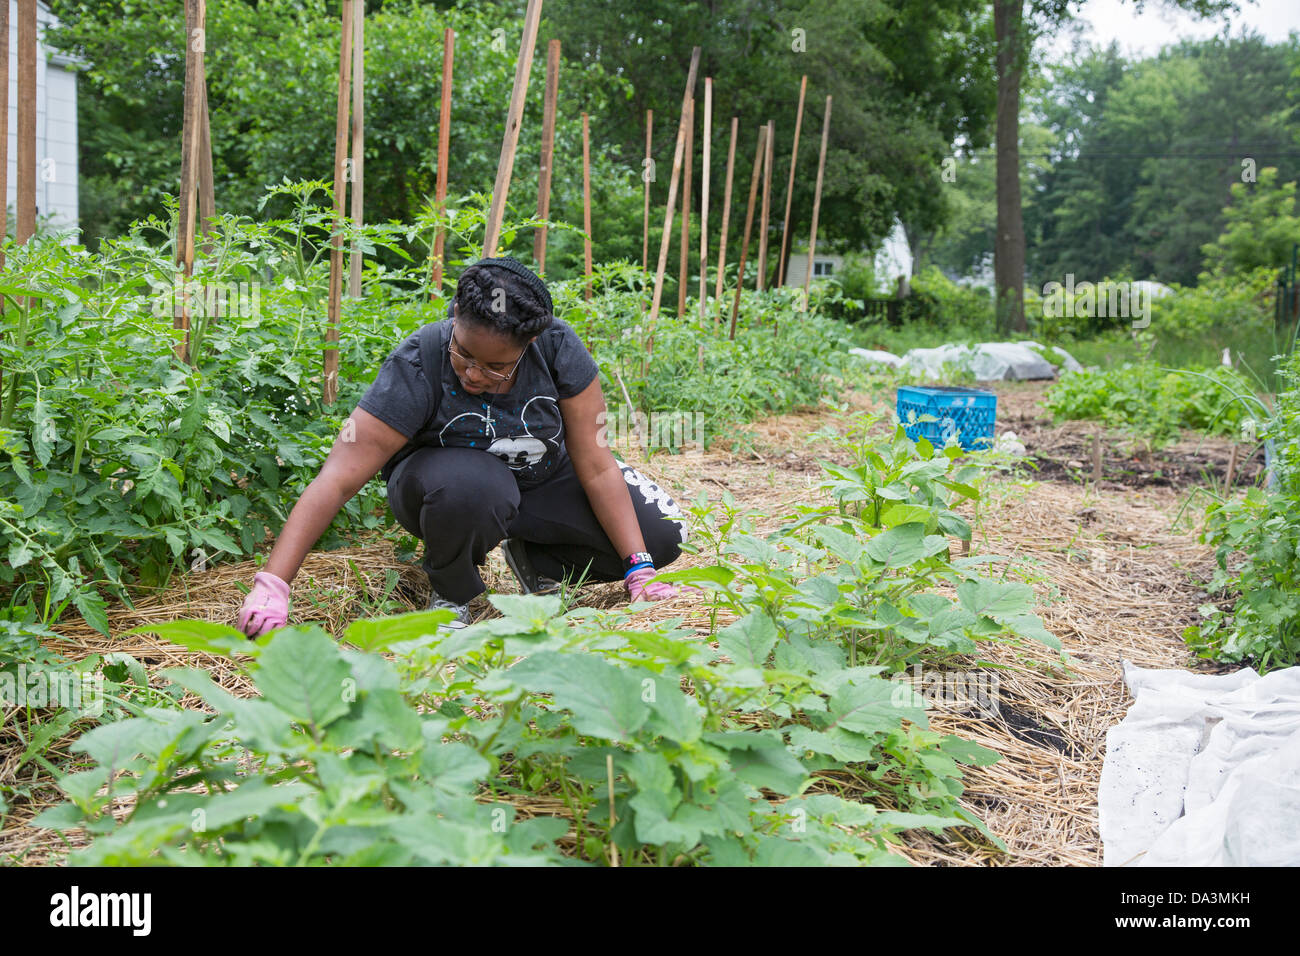 A college student works as an intern in a community garden in Brightmoor, one of the most distressed neighborhoods of Detroit. Stock Photo